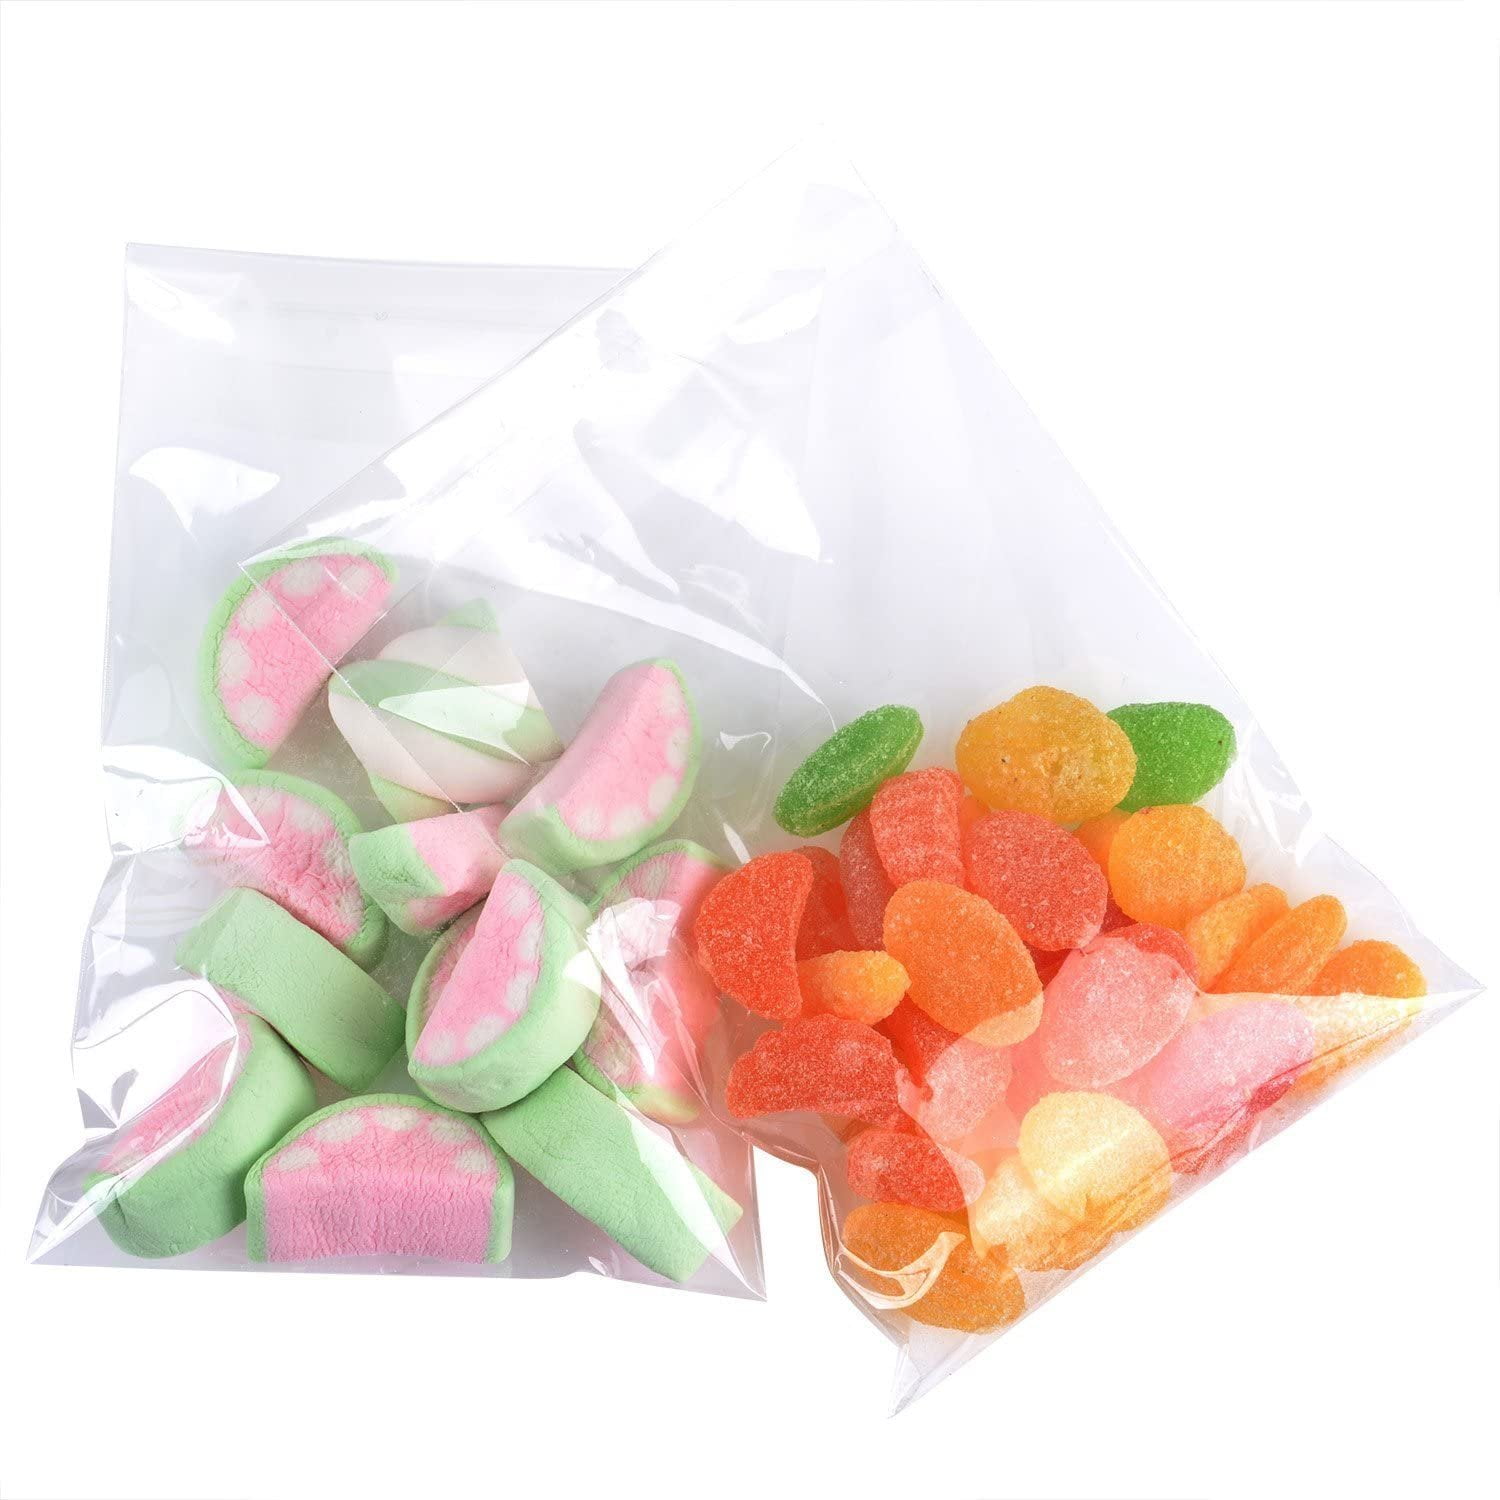 Cellophane Bag for Cards Sweet Candy & Gift Clear Self Seal Cello Display Bags 